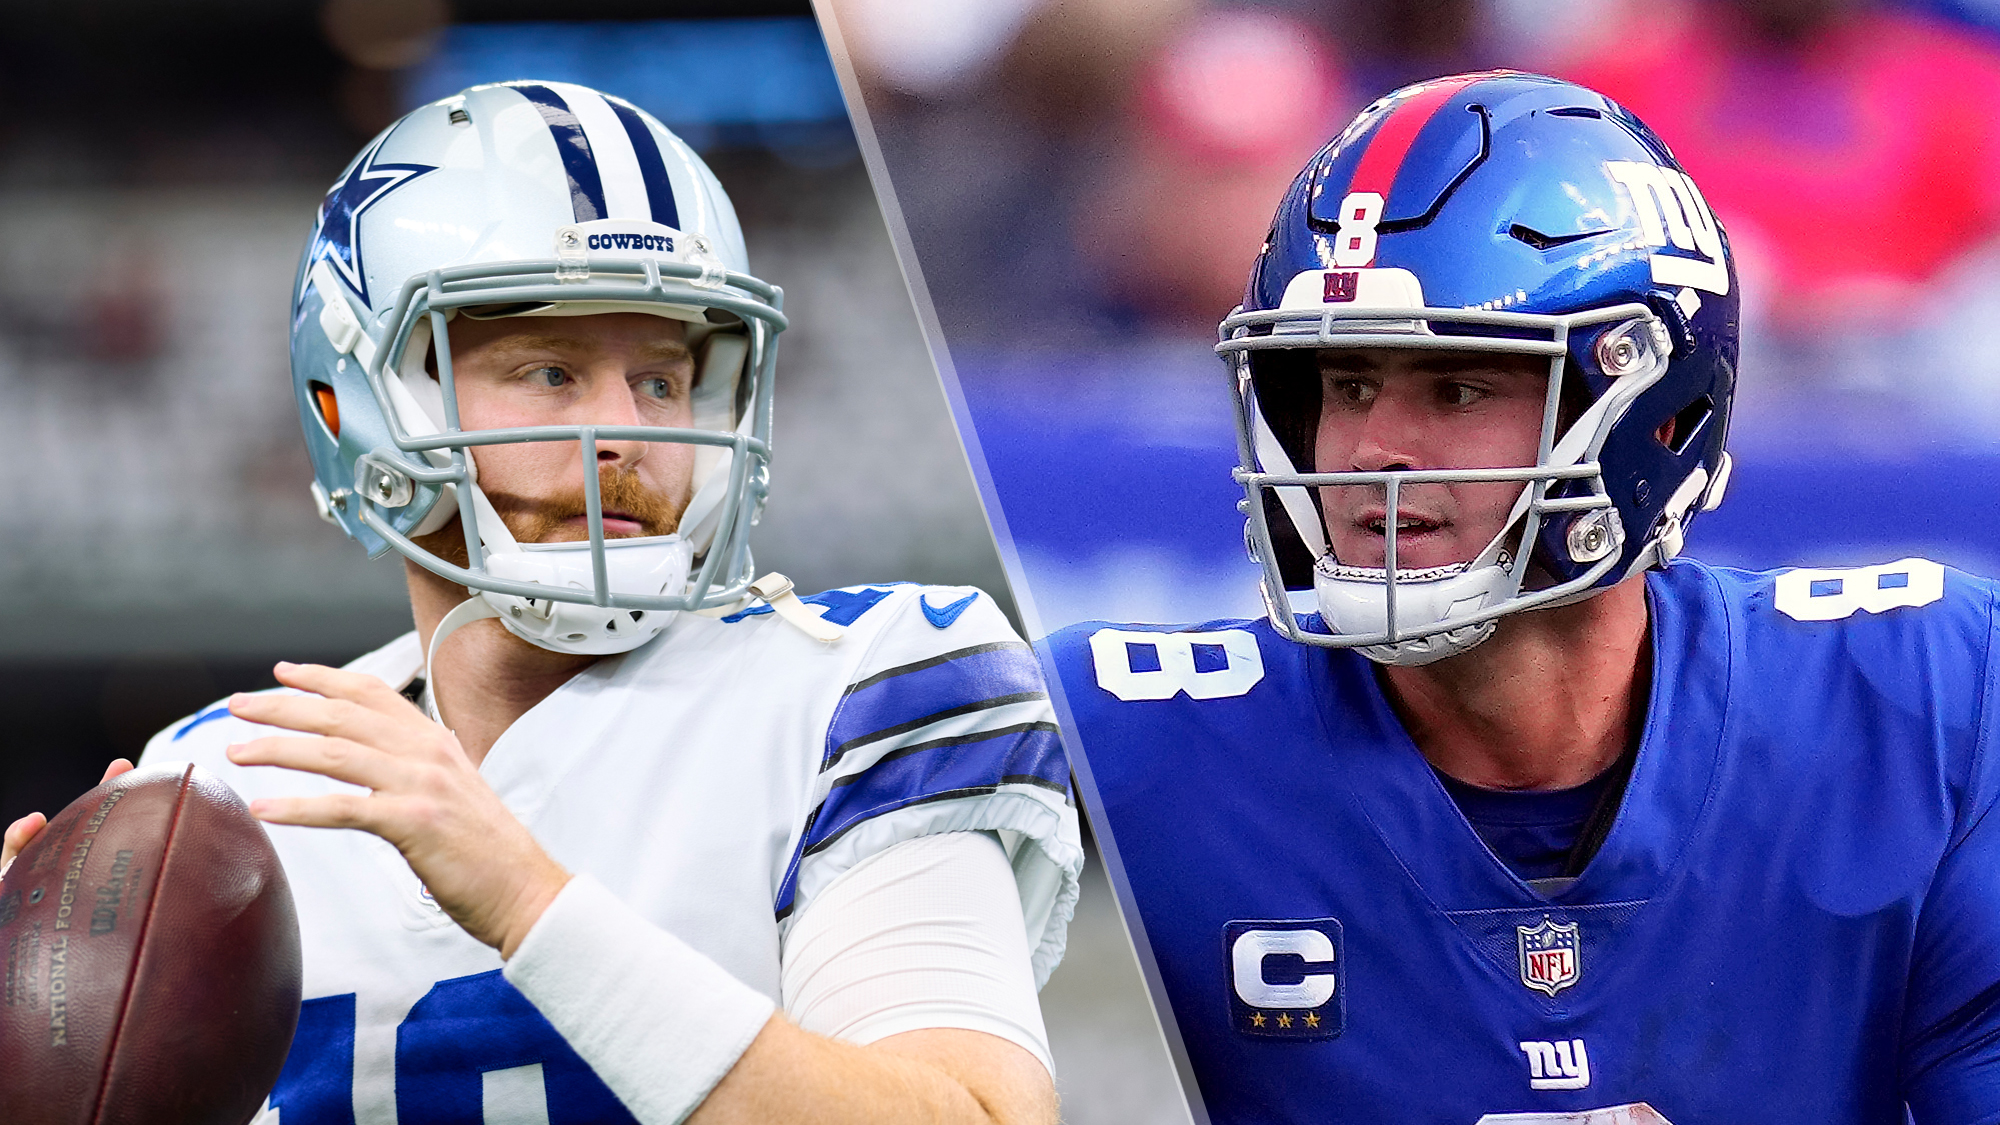 giants vs cowboys where to watch